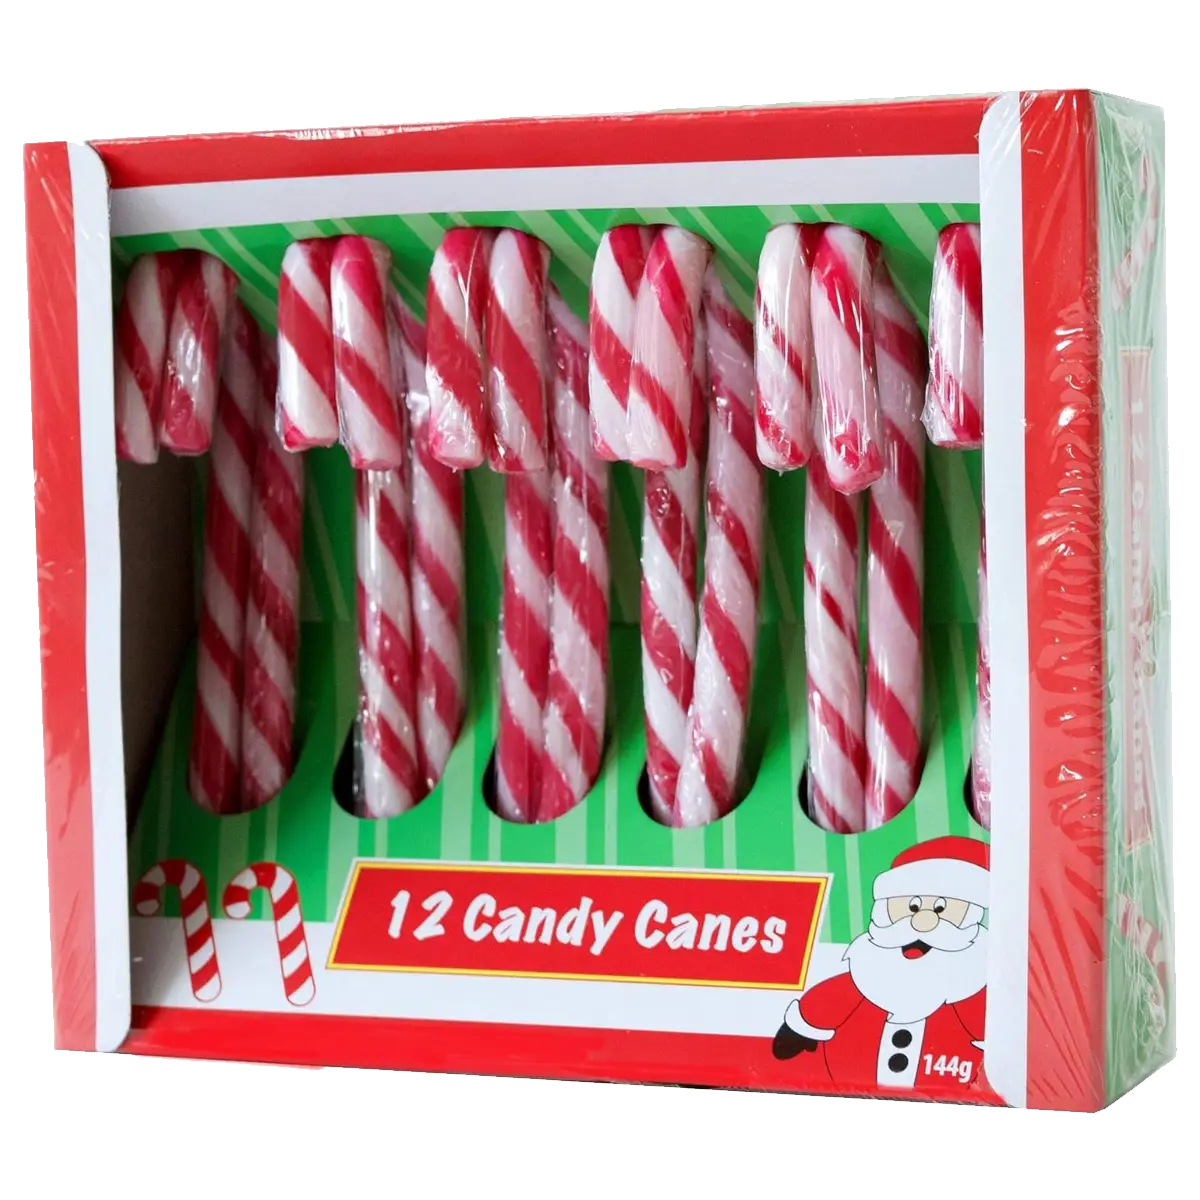 Becky's Candy Canes, 12 Pcs